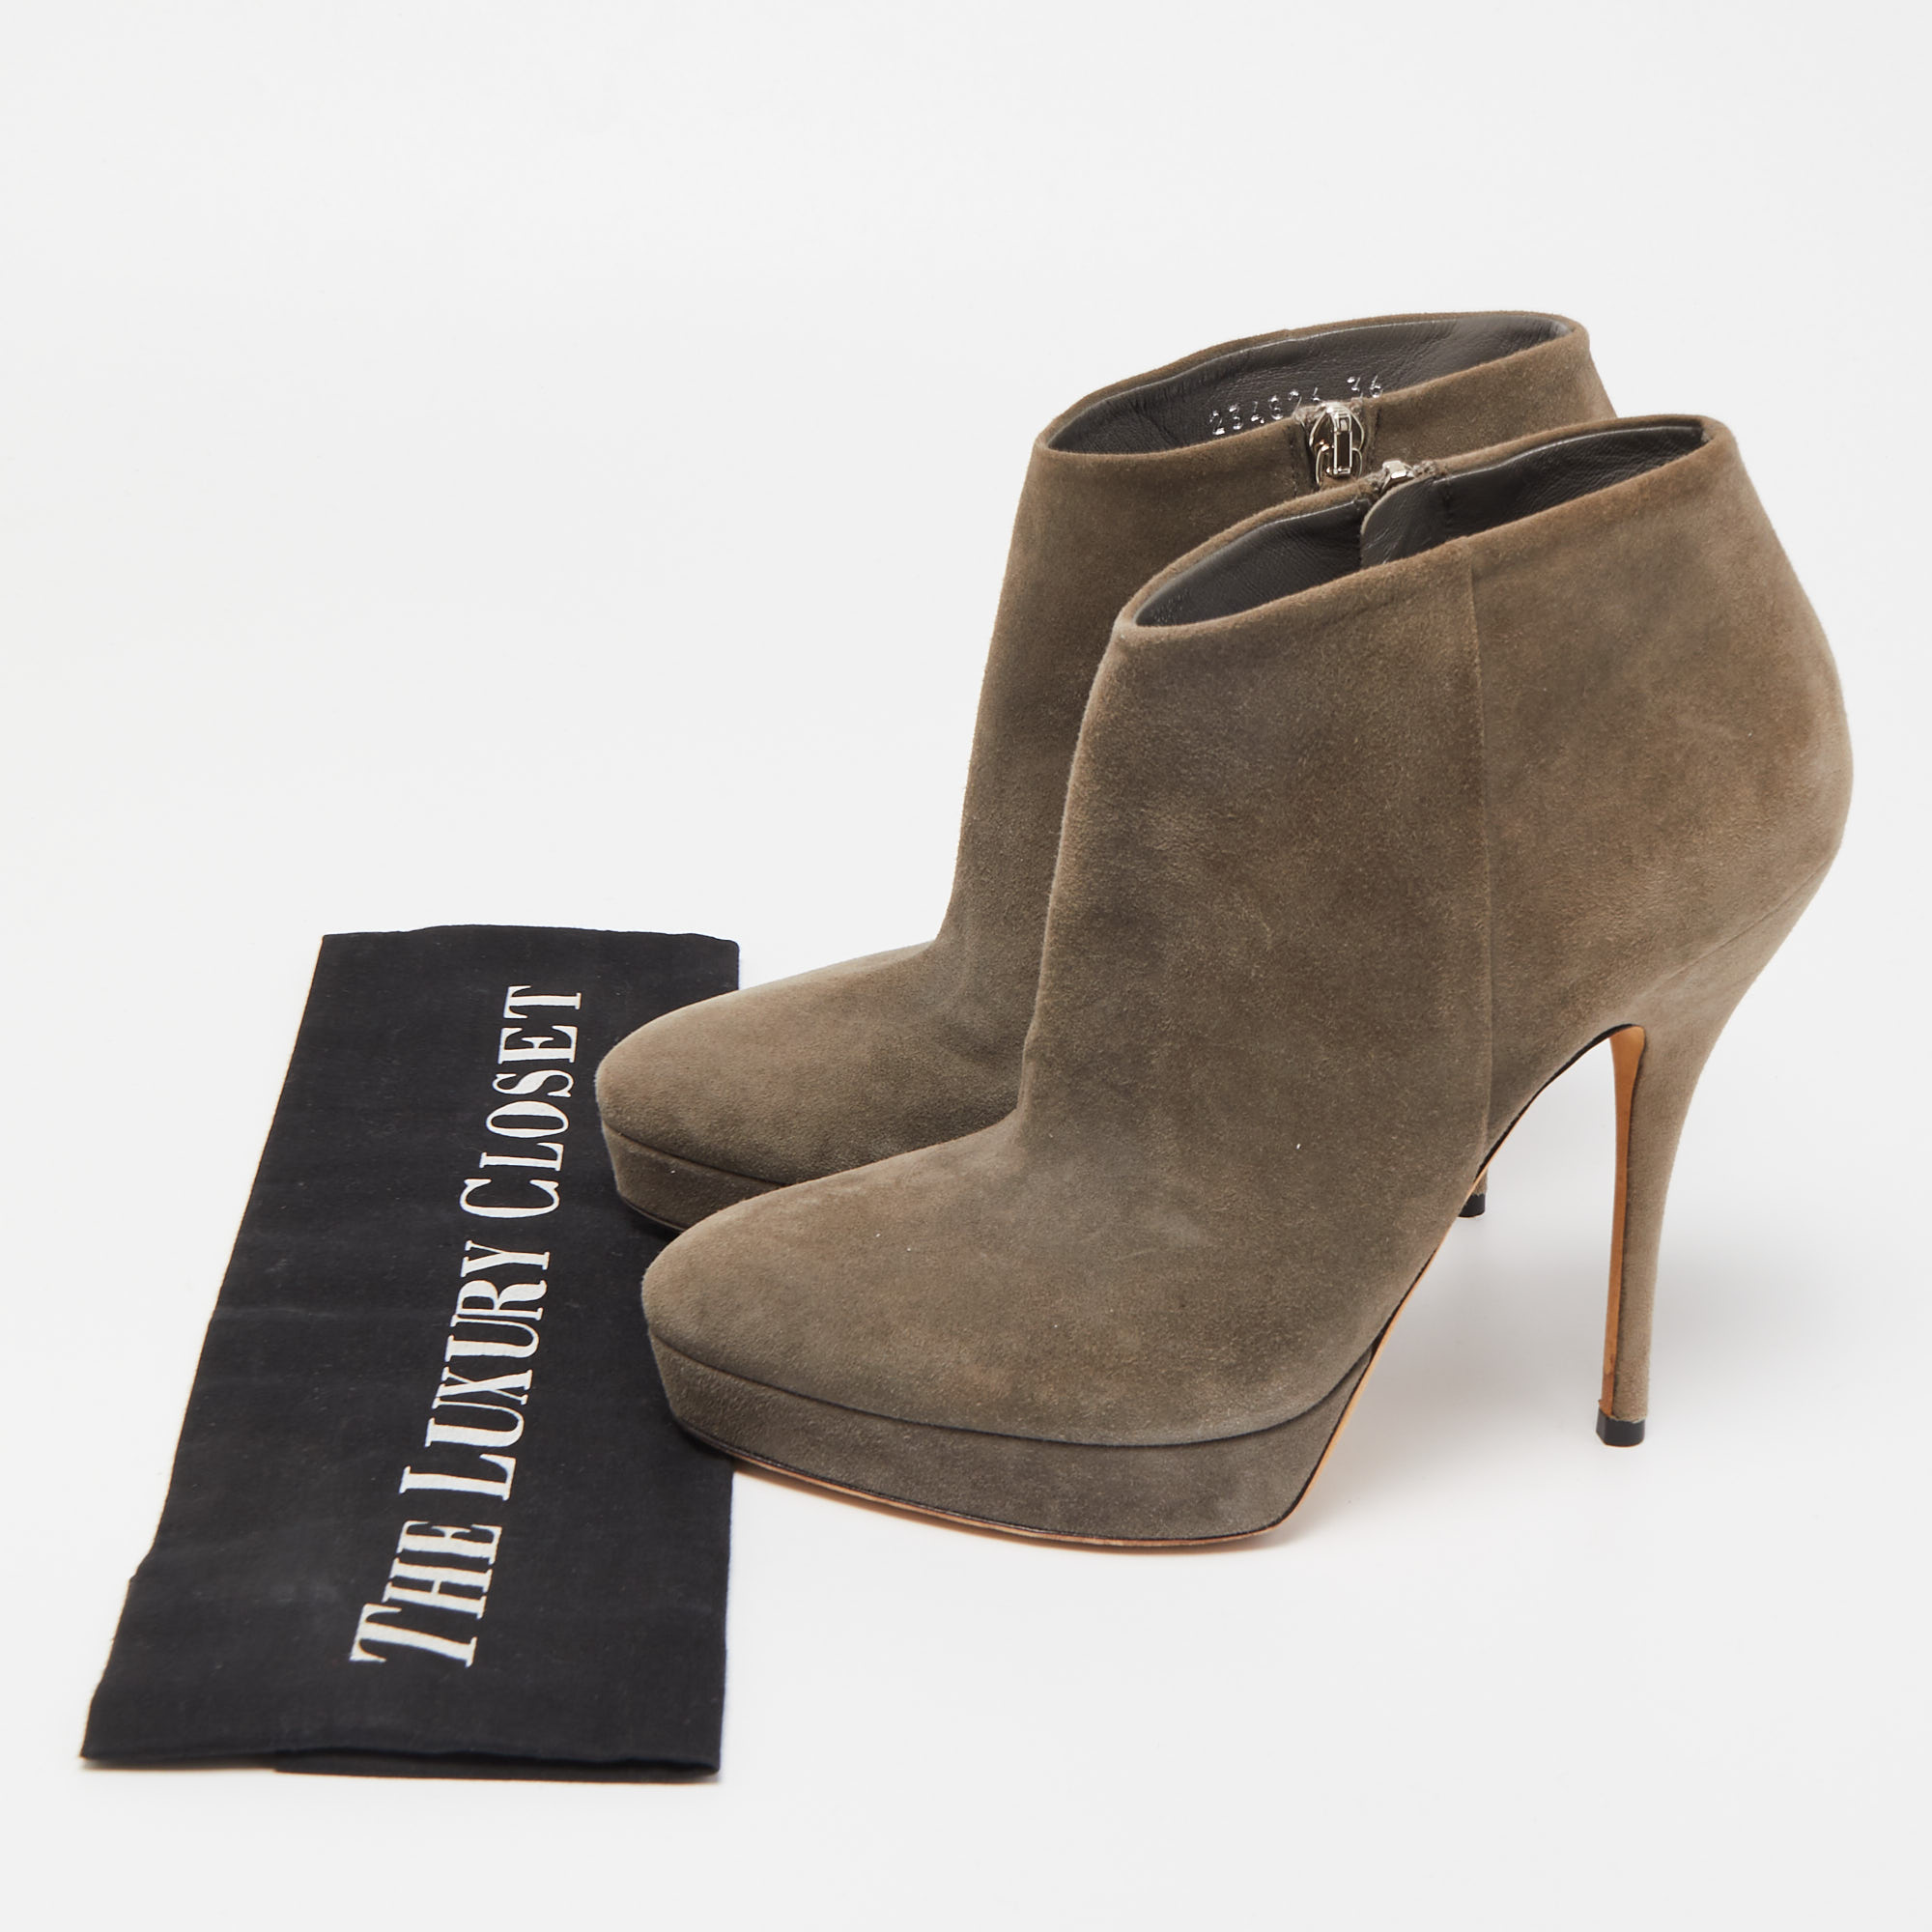 Gucci Grey Suede Platform Ankle Booties Size 36